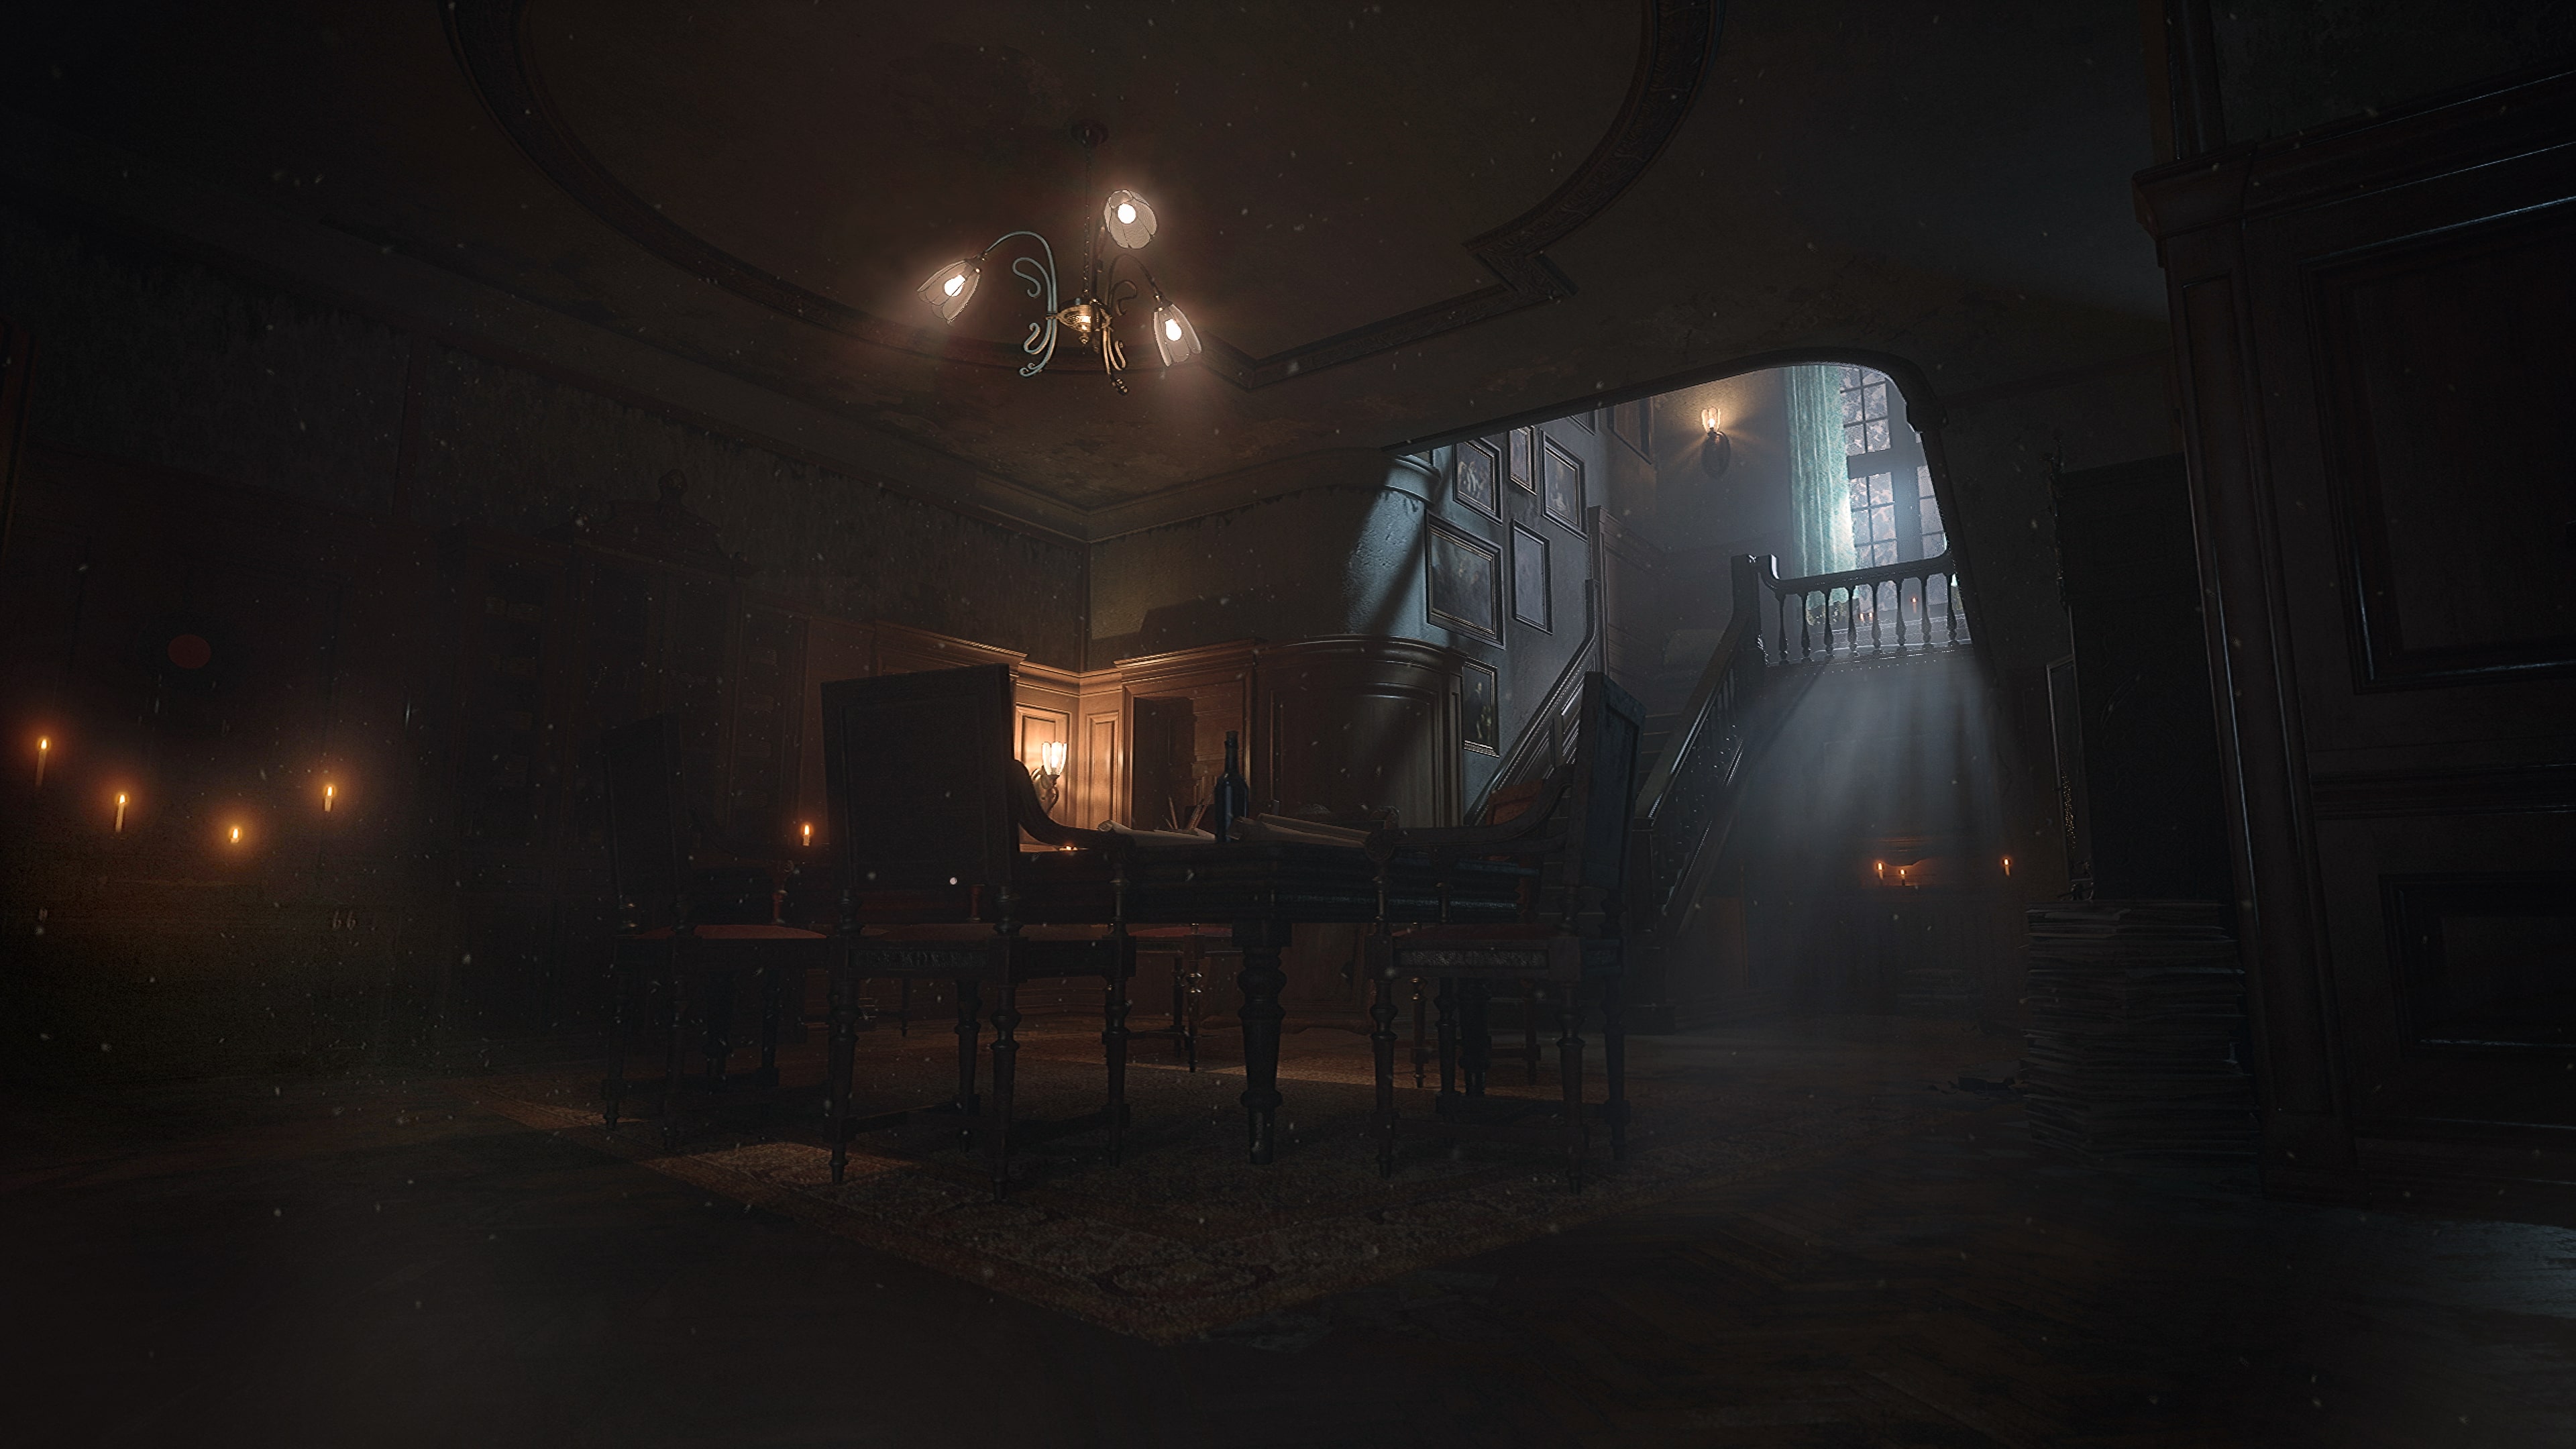 Layers of Fear - Exclusive Additional Content